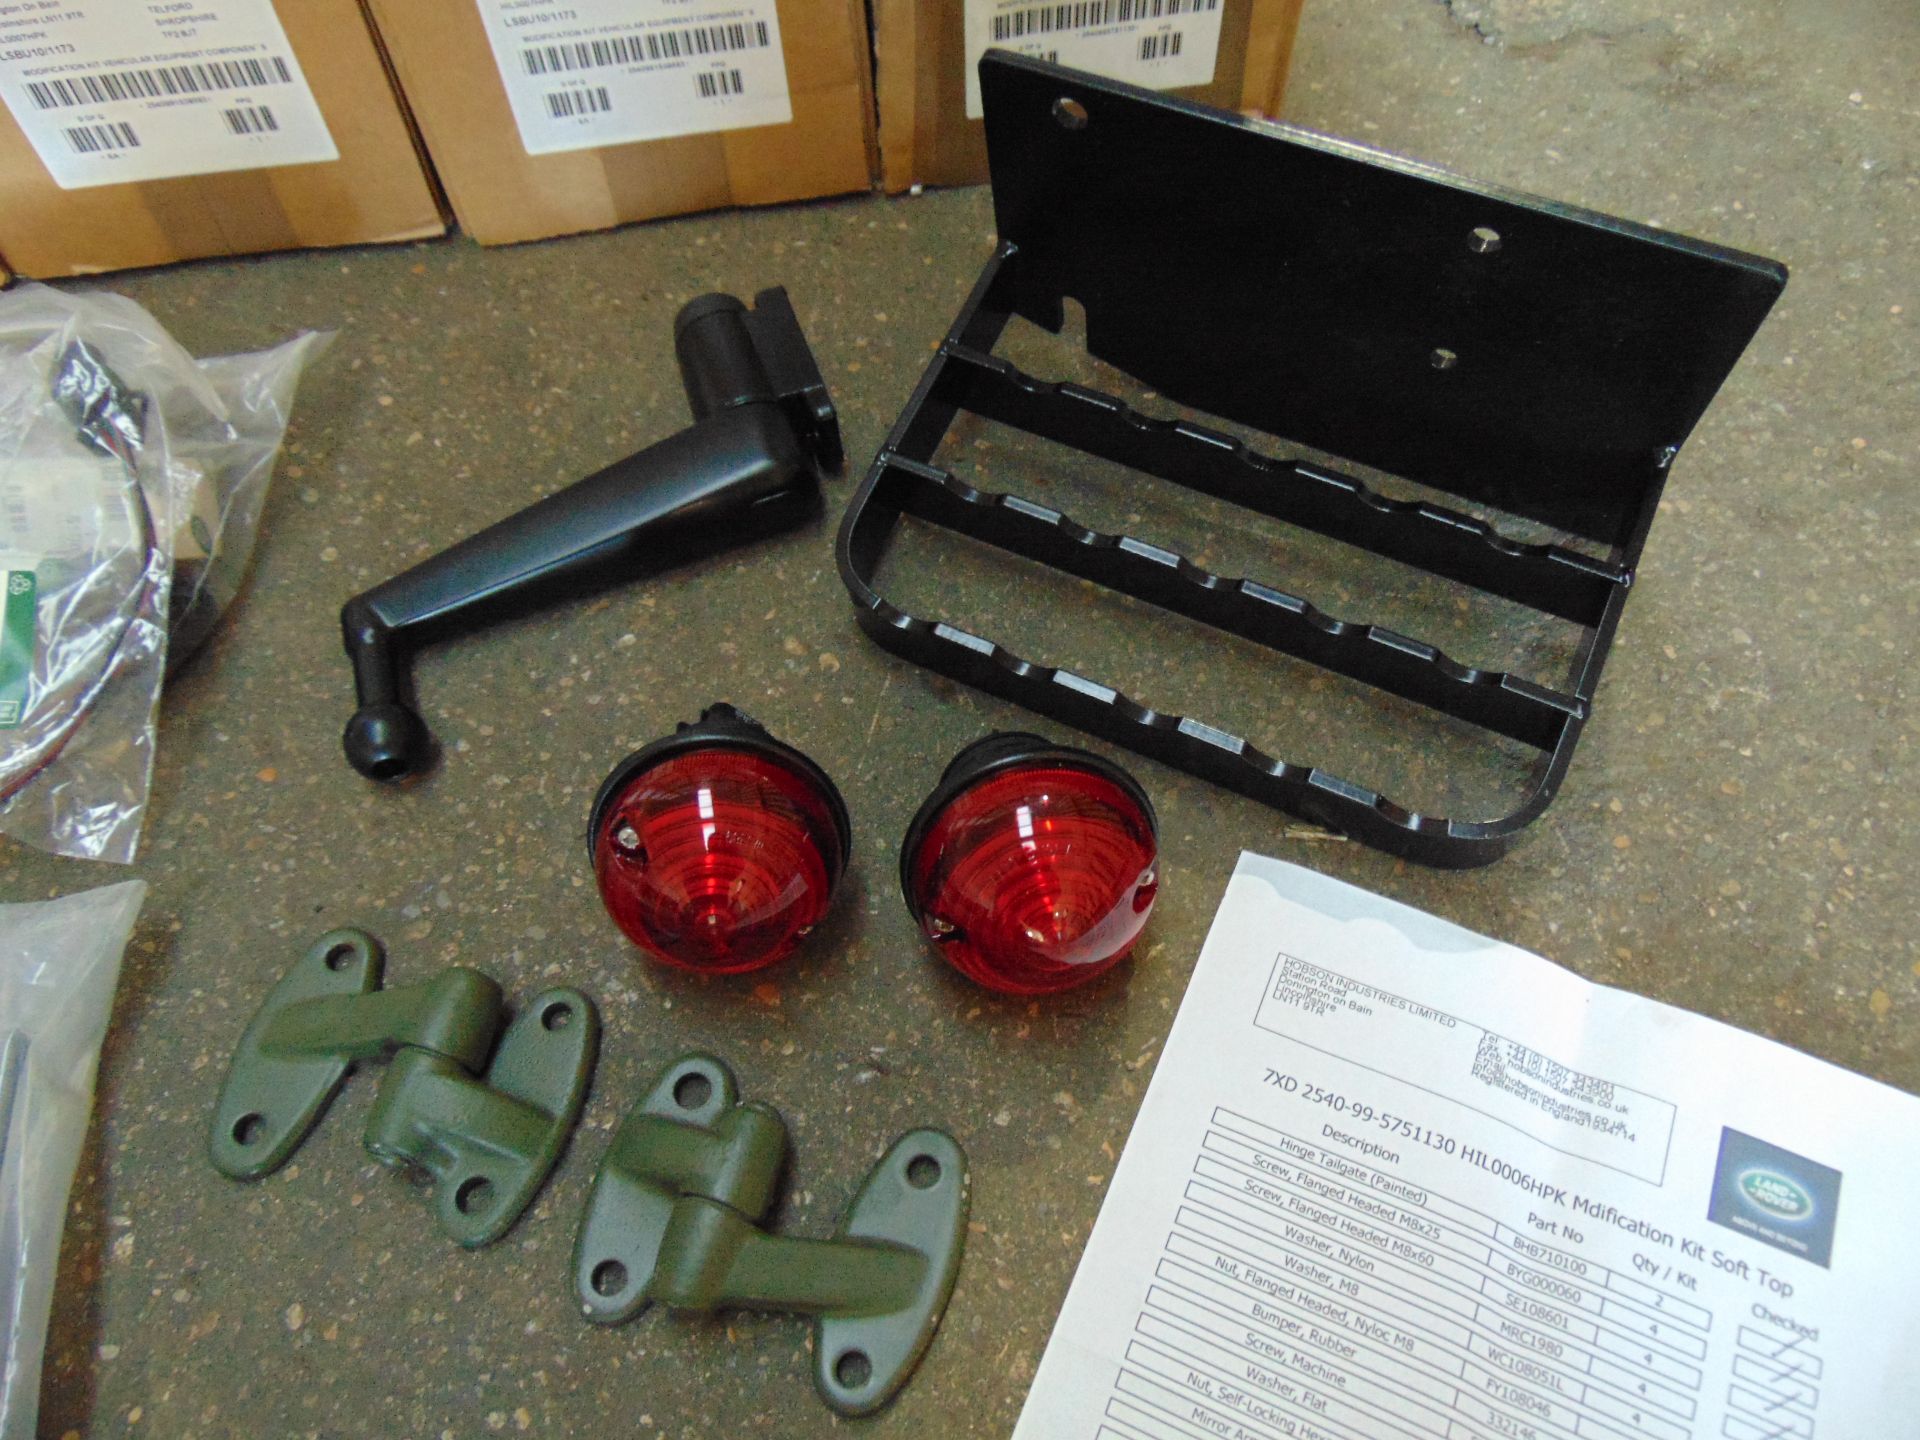 20 x Land Rover 90/110 Soft Top Modification Kits - Image 3 of 4